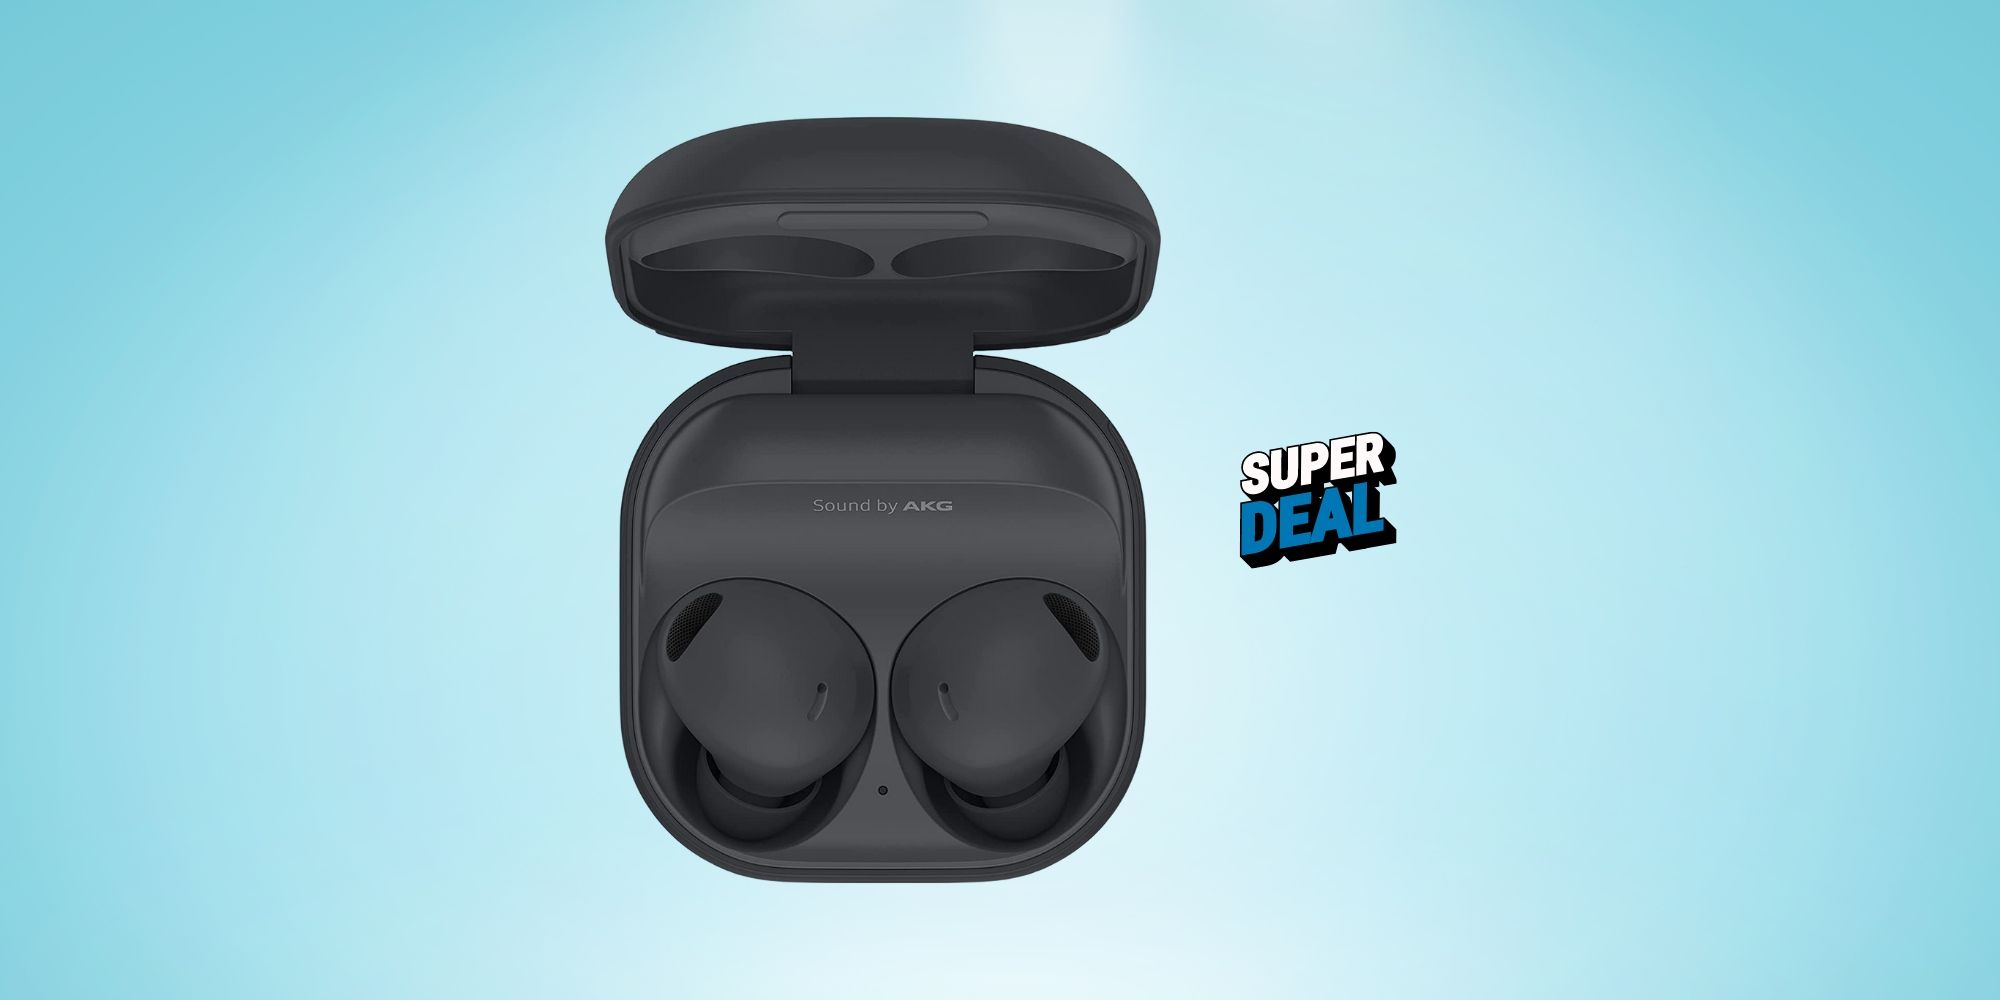 image of Galaxy Buds 2 Pro in Graphite color